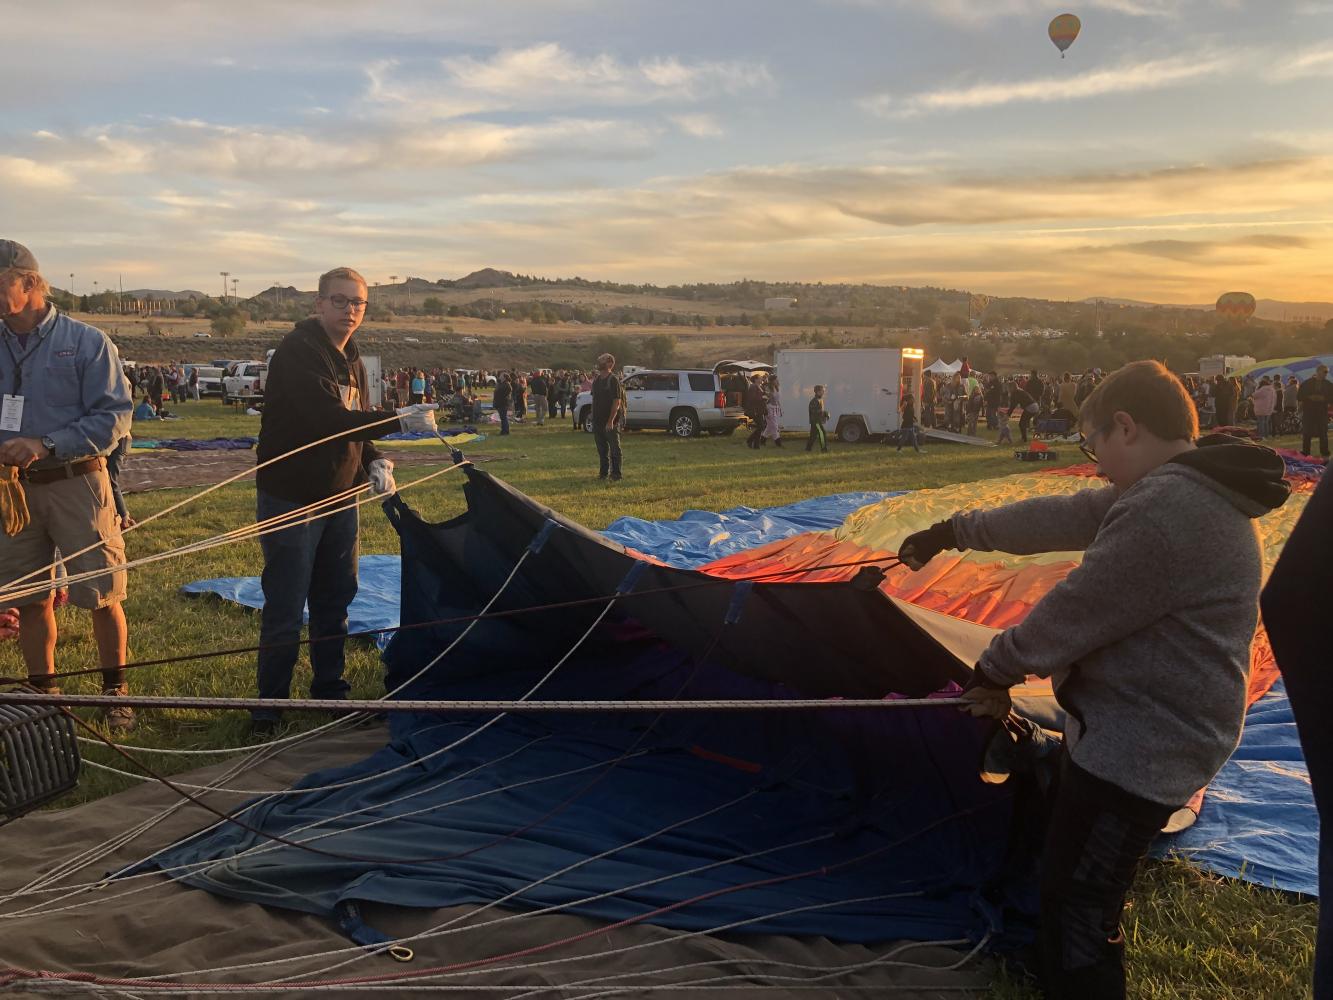 Holding+the+%E2%80%9Cenvelope%E2%80%9D+of+the+balloon+up%2C+sophomore+Landon+Sims+and+his+brother+assemble+their+own+hot-air+balloon+at+sunrise.+Initially+fascinated+by+the+process+it+took+to+assemble+the+hot+air+balloon%2C+Sims+began+to+learn+how+to+fly+in+one.+%E2%80%9CI+got+really+attracted+to+it+when+I+got+to+experience+helping+out%2C+then+getting+to+fly+in+it+as+the+reward+later+on.%E2%80%9D+%28Photo+Credit%3A+Landon+Sims%29